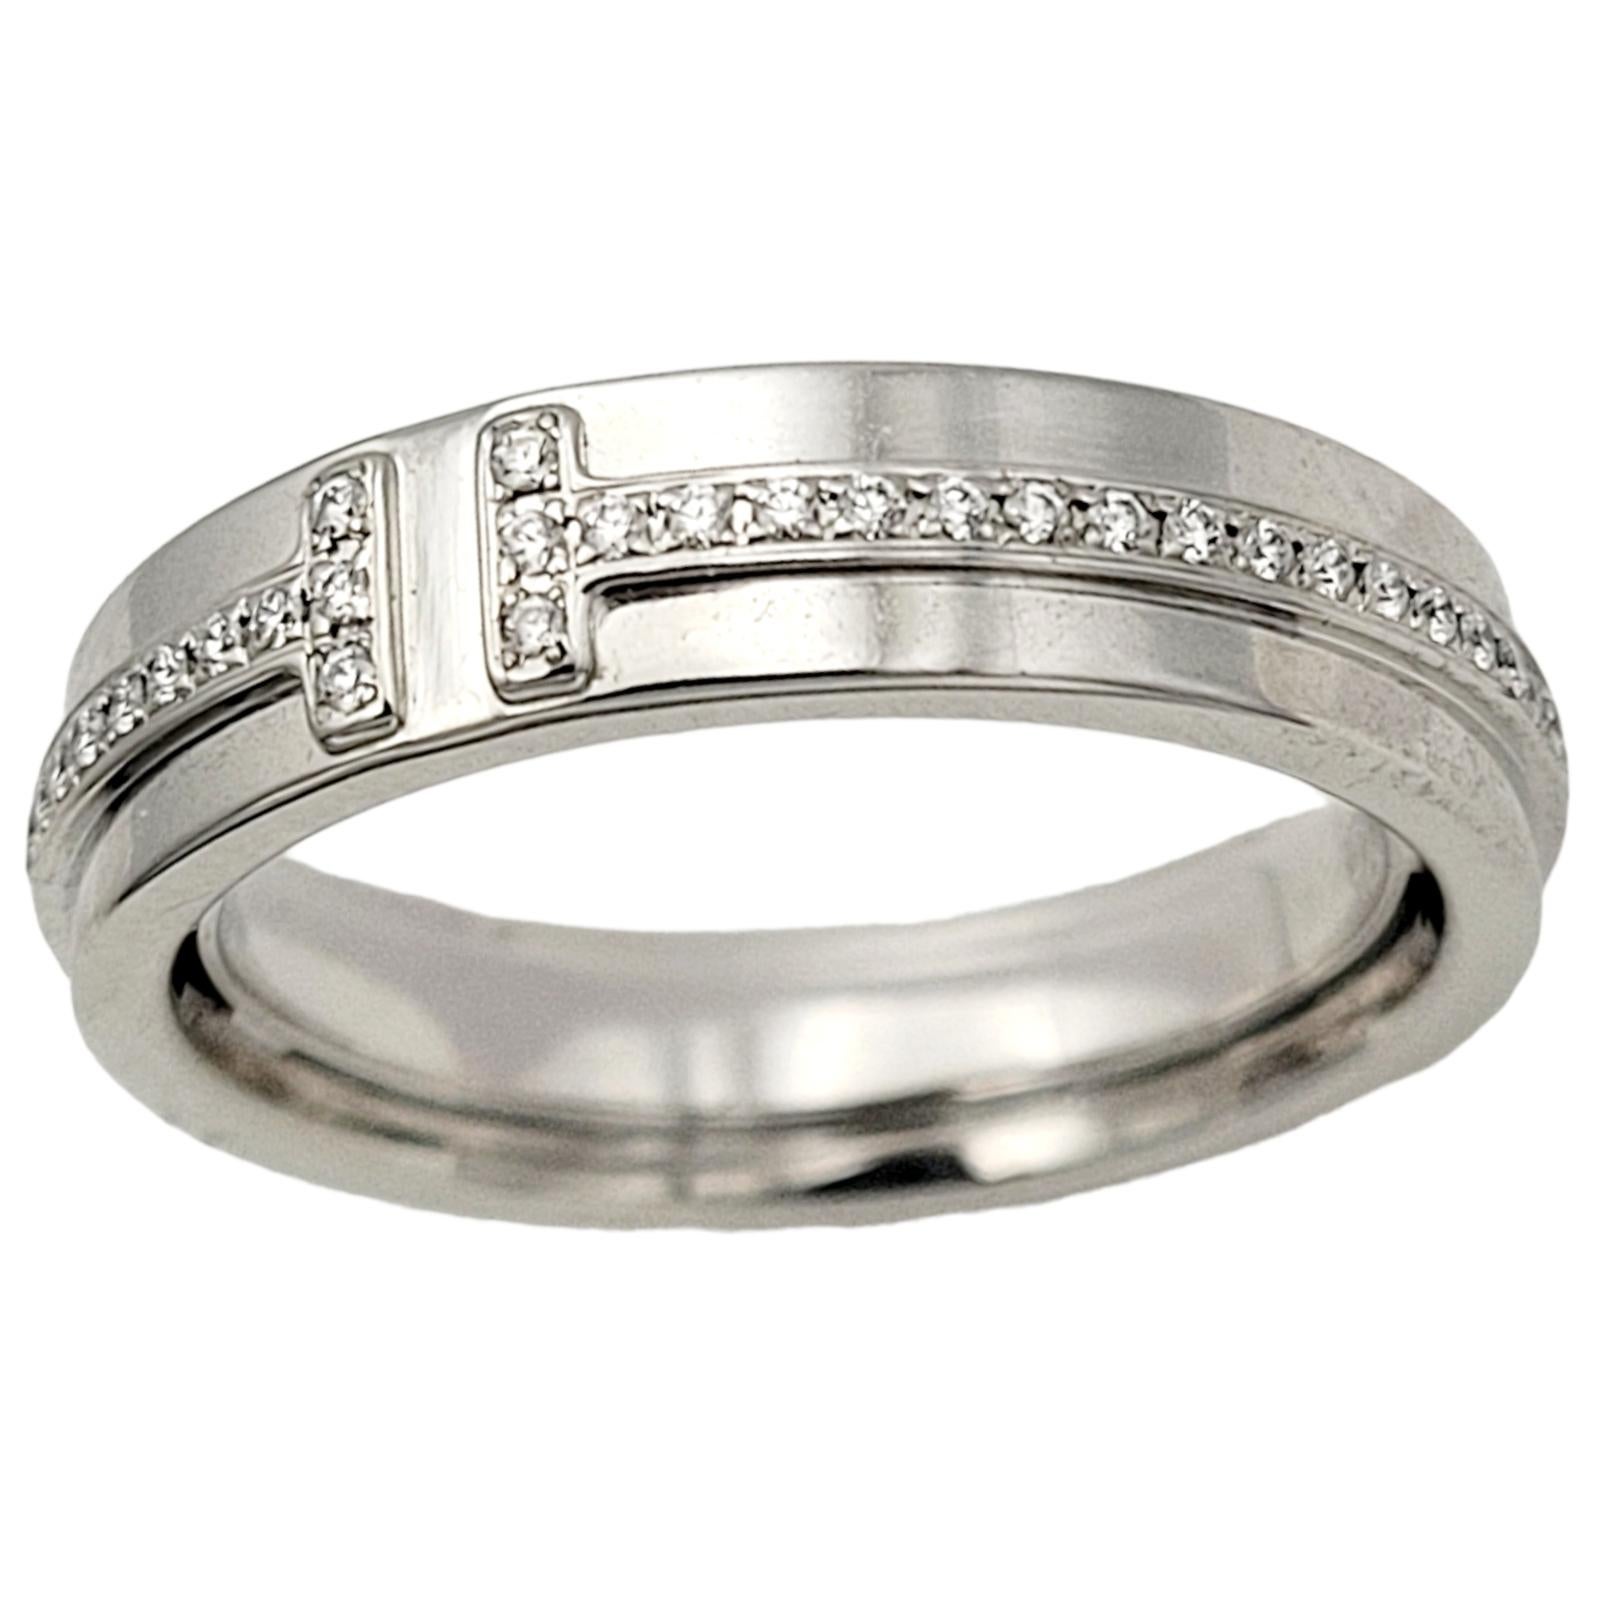 Contemporary Tiffany & Co. Tiffany T Collection Narrow Diamond Ring in 18 Karat White Gold For Sale